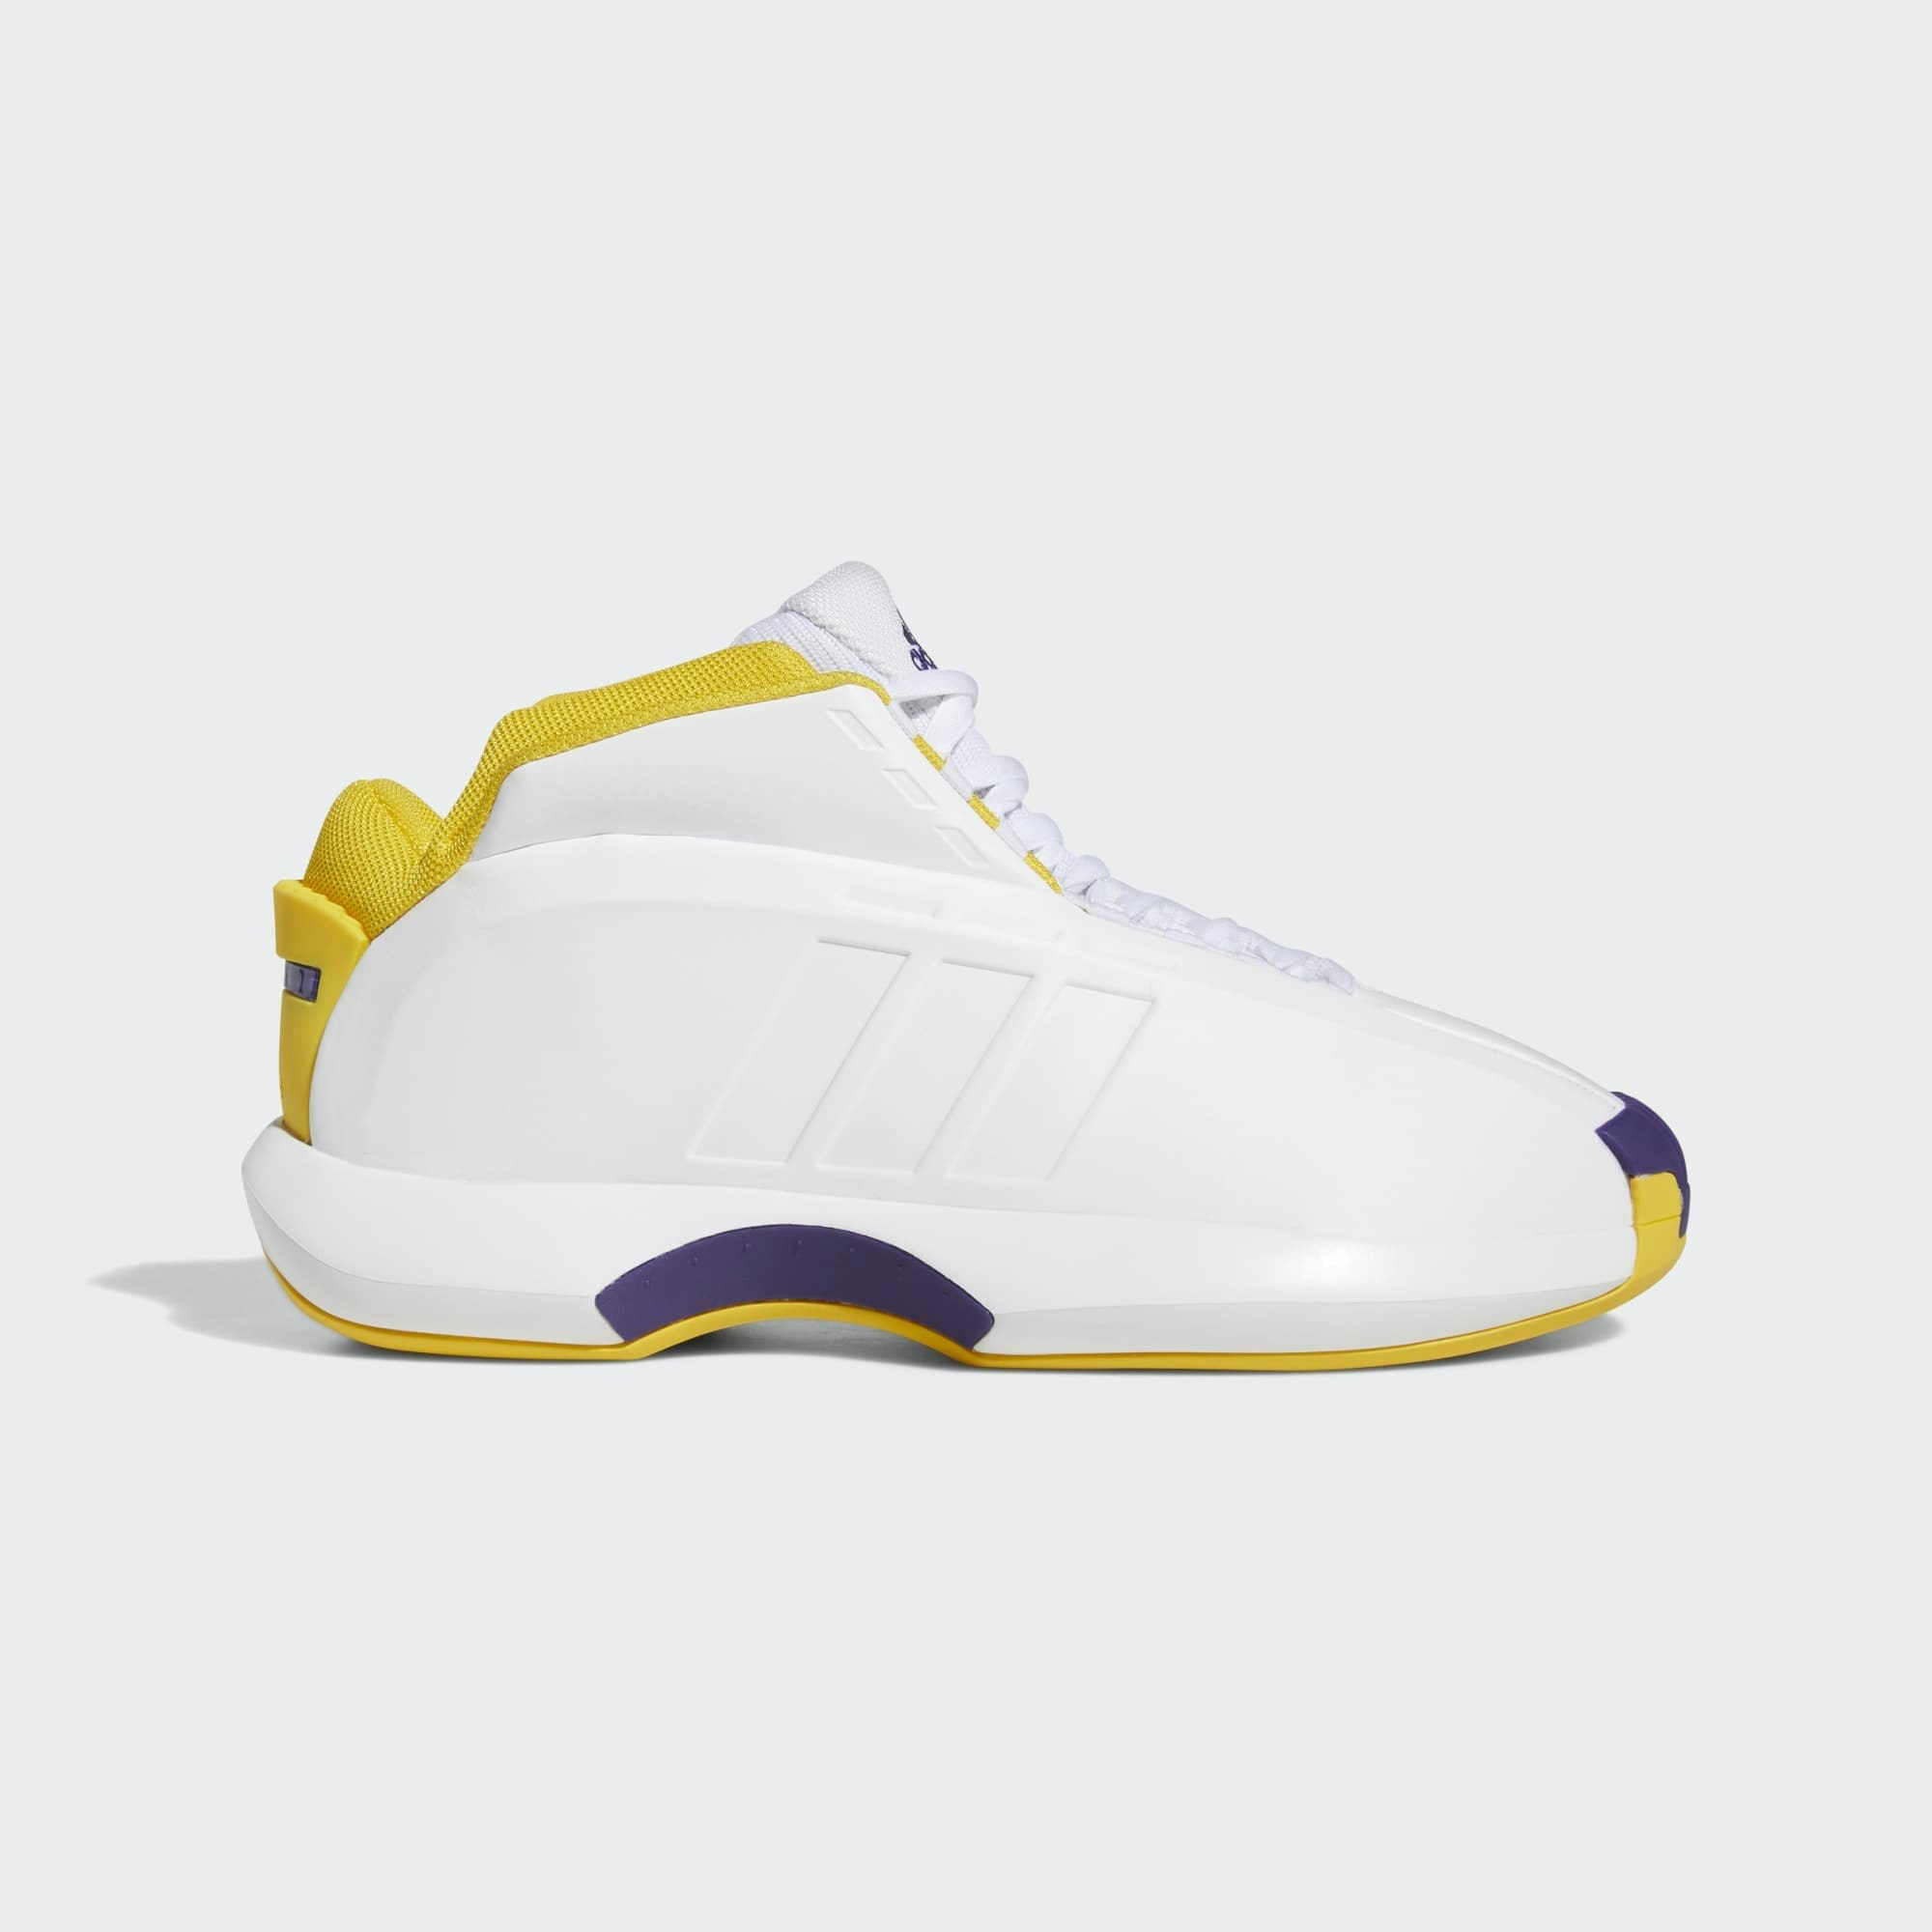 adidas Crazy 1 "Lakers Home"